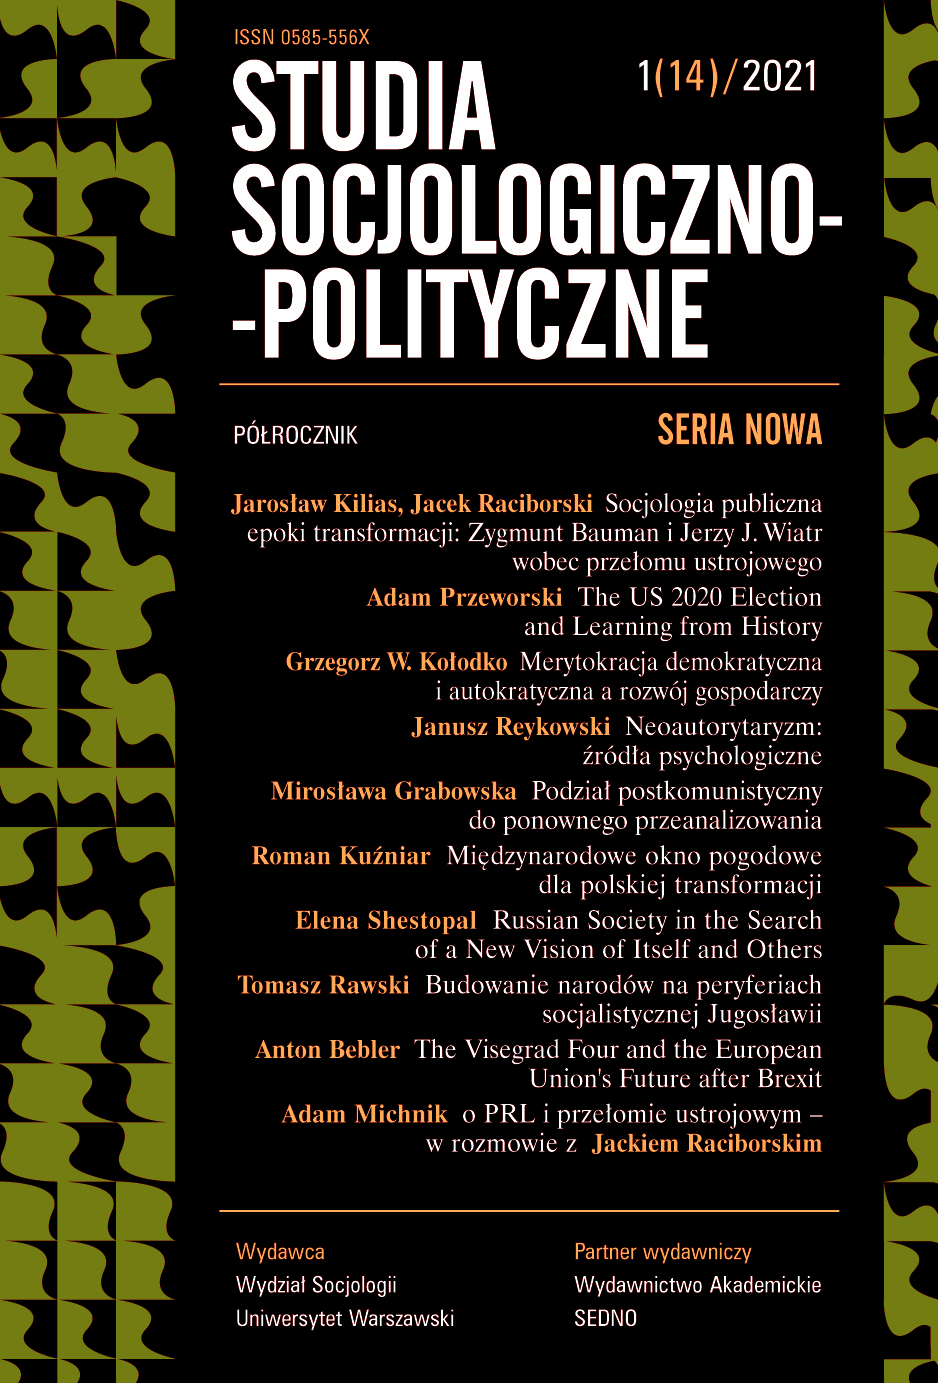 Jacek Raciborski in conversation with Adam Michnik on Polish People’s Republic, political breakthrough and political role of a few scholars Cover Image